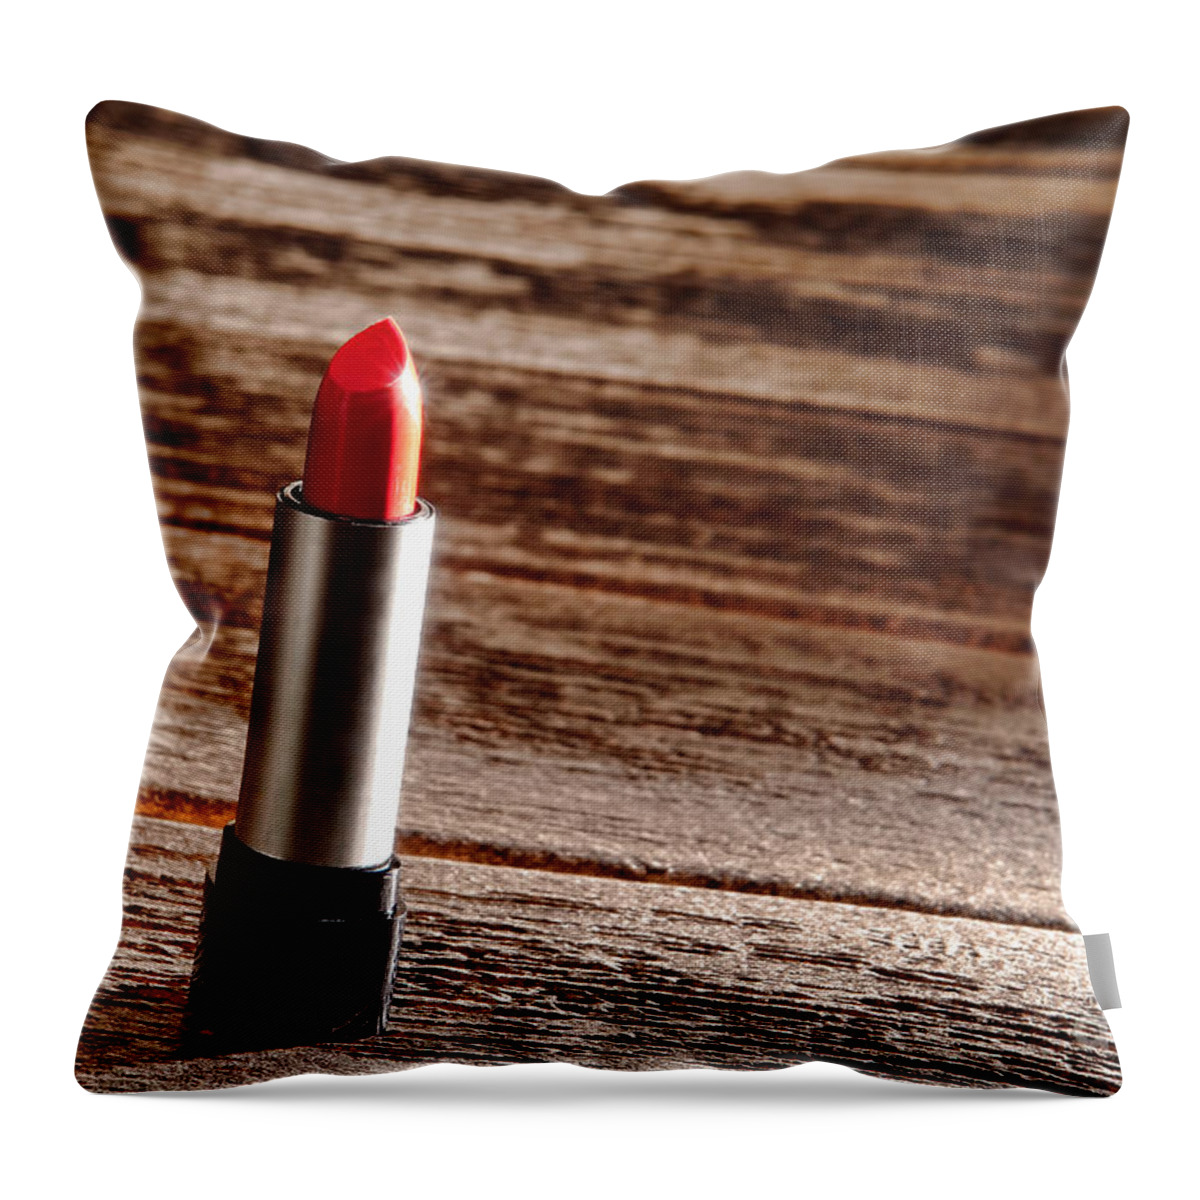 Lipstick Throw Pillow featuring the photograph Red Lipstick by Olivier Le Queinec